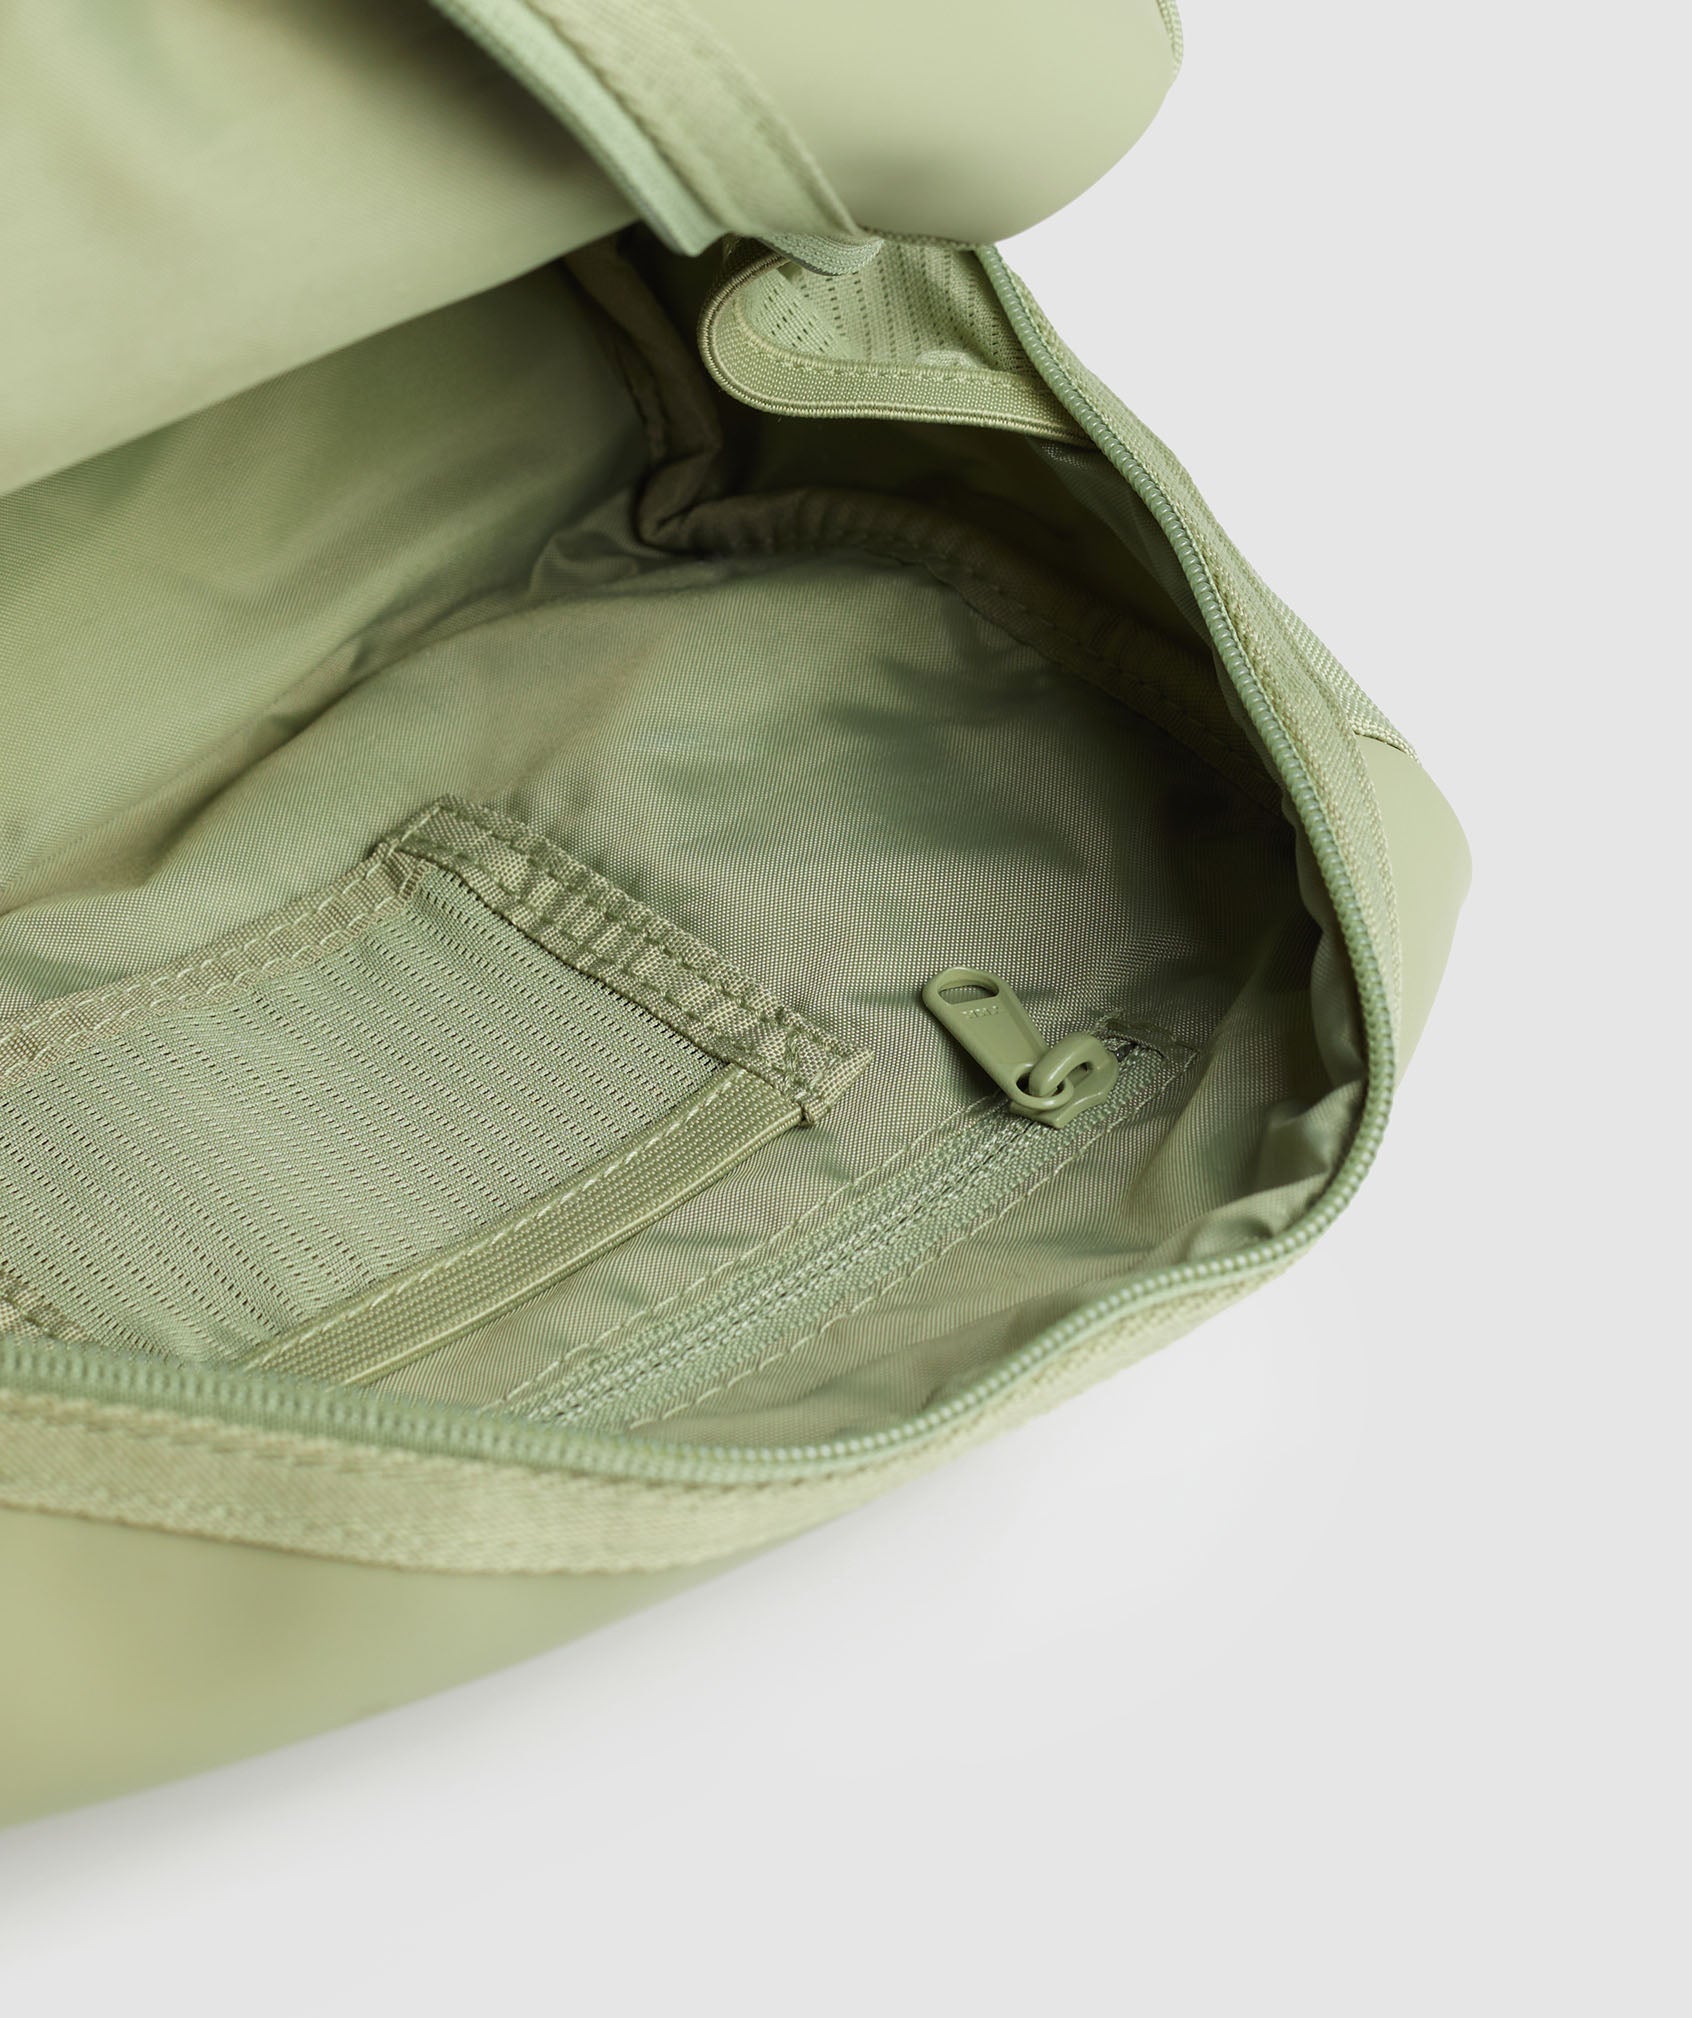 Everyday Mini Gym Bag in Natural Sage Green - view 5